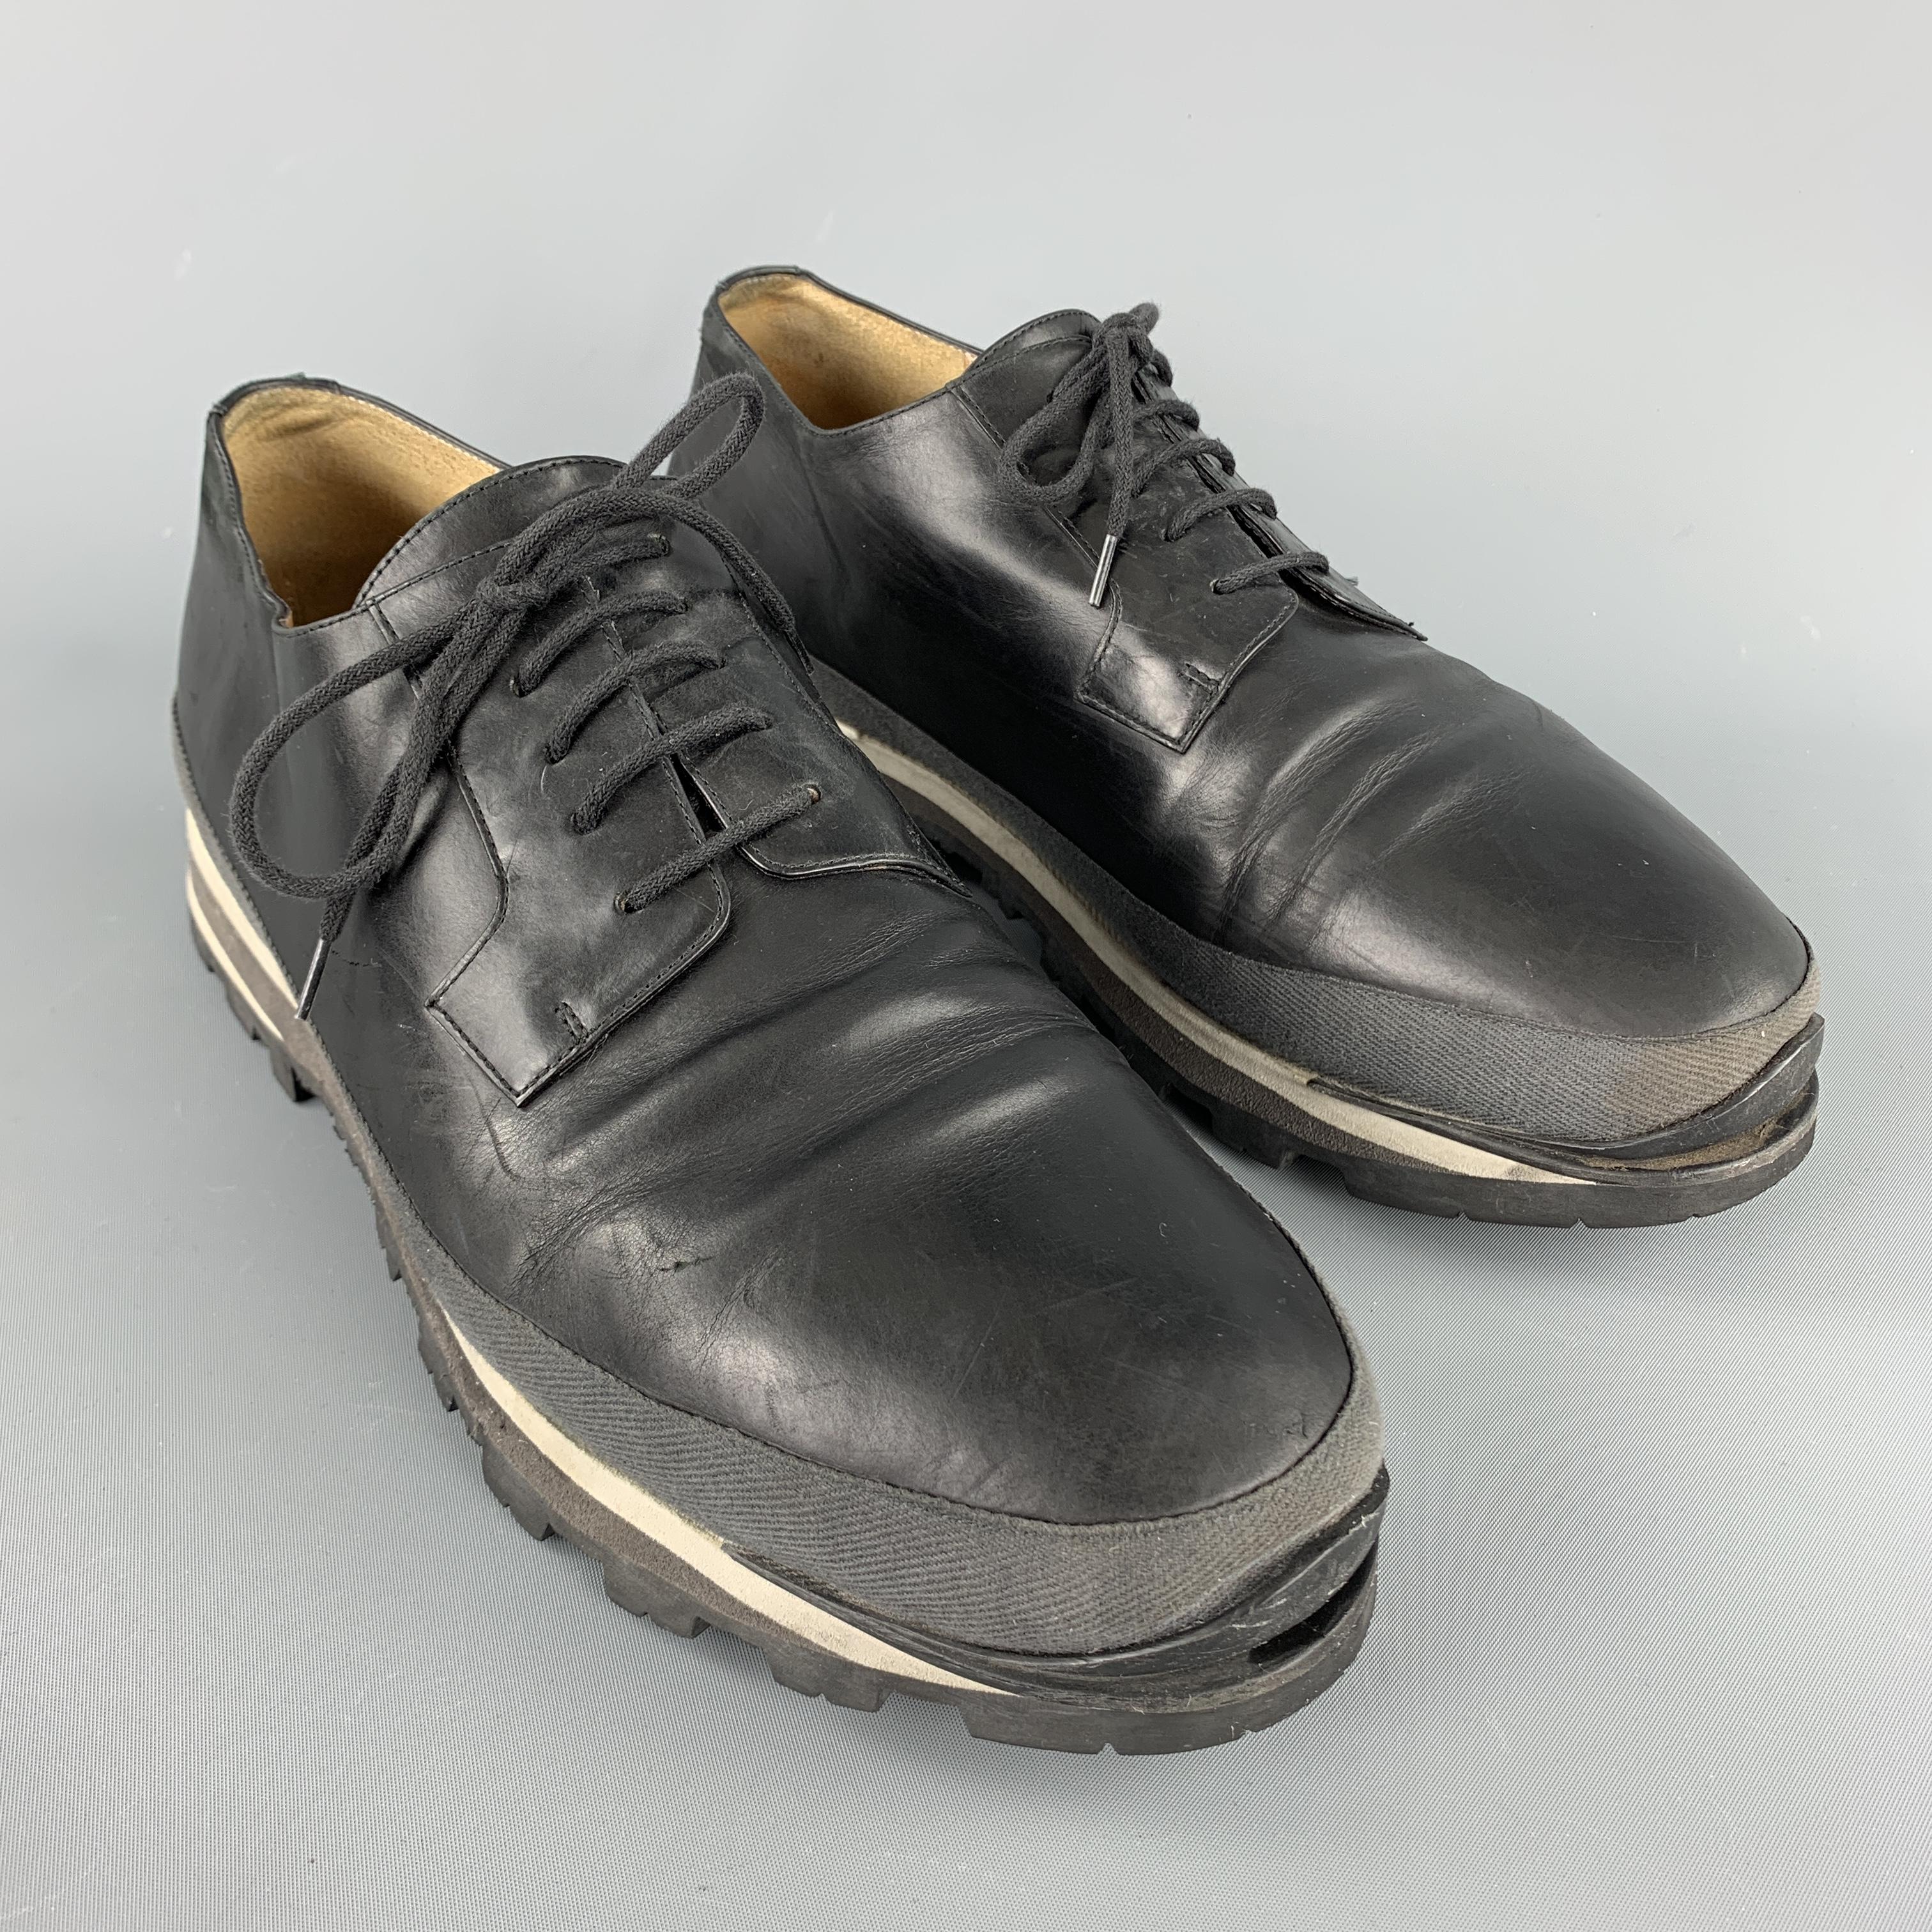 DRIES VAN NOTEN lace up shoes comes in a black solid leather material, with a grey trim, a contrast trim, and a track sole. Made in Italy.

Good Pre-Owned Condition.
Marked: IT 44   14833

Outsole: 12.5 x 4 in. 